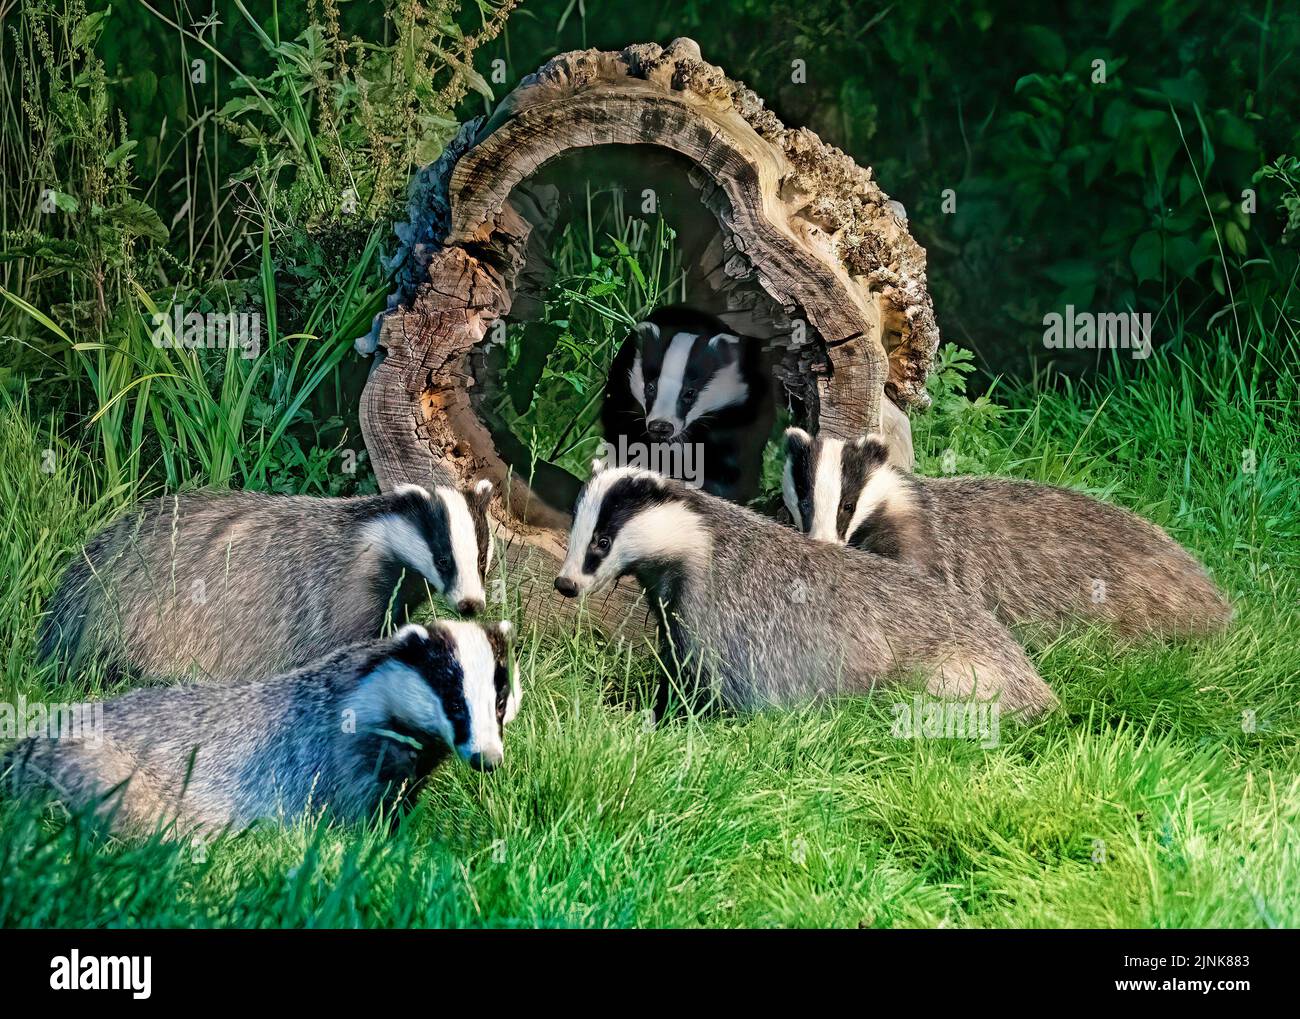 Five badgers were spotted in total playing in the hollowed-out tree. HAWICK, SCOTLAND. A LUCKY Scottish photographer looked on in amazement at these c Stock Photo